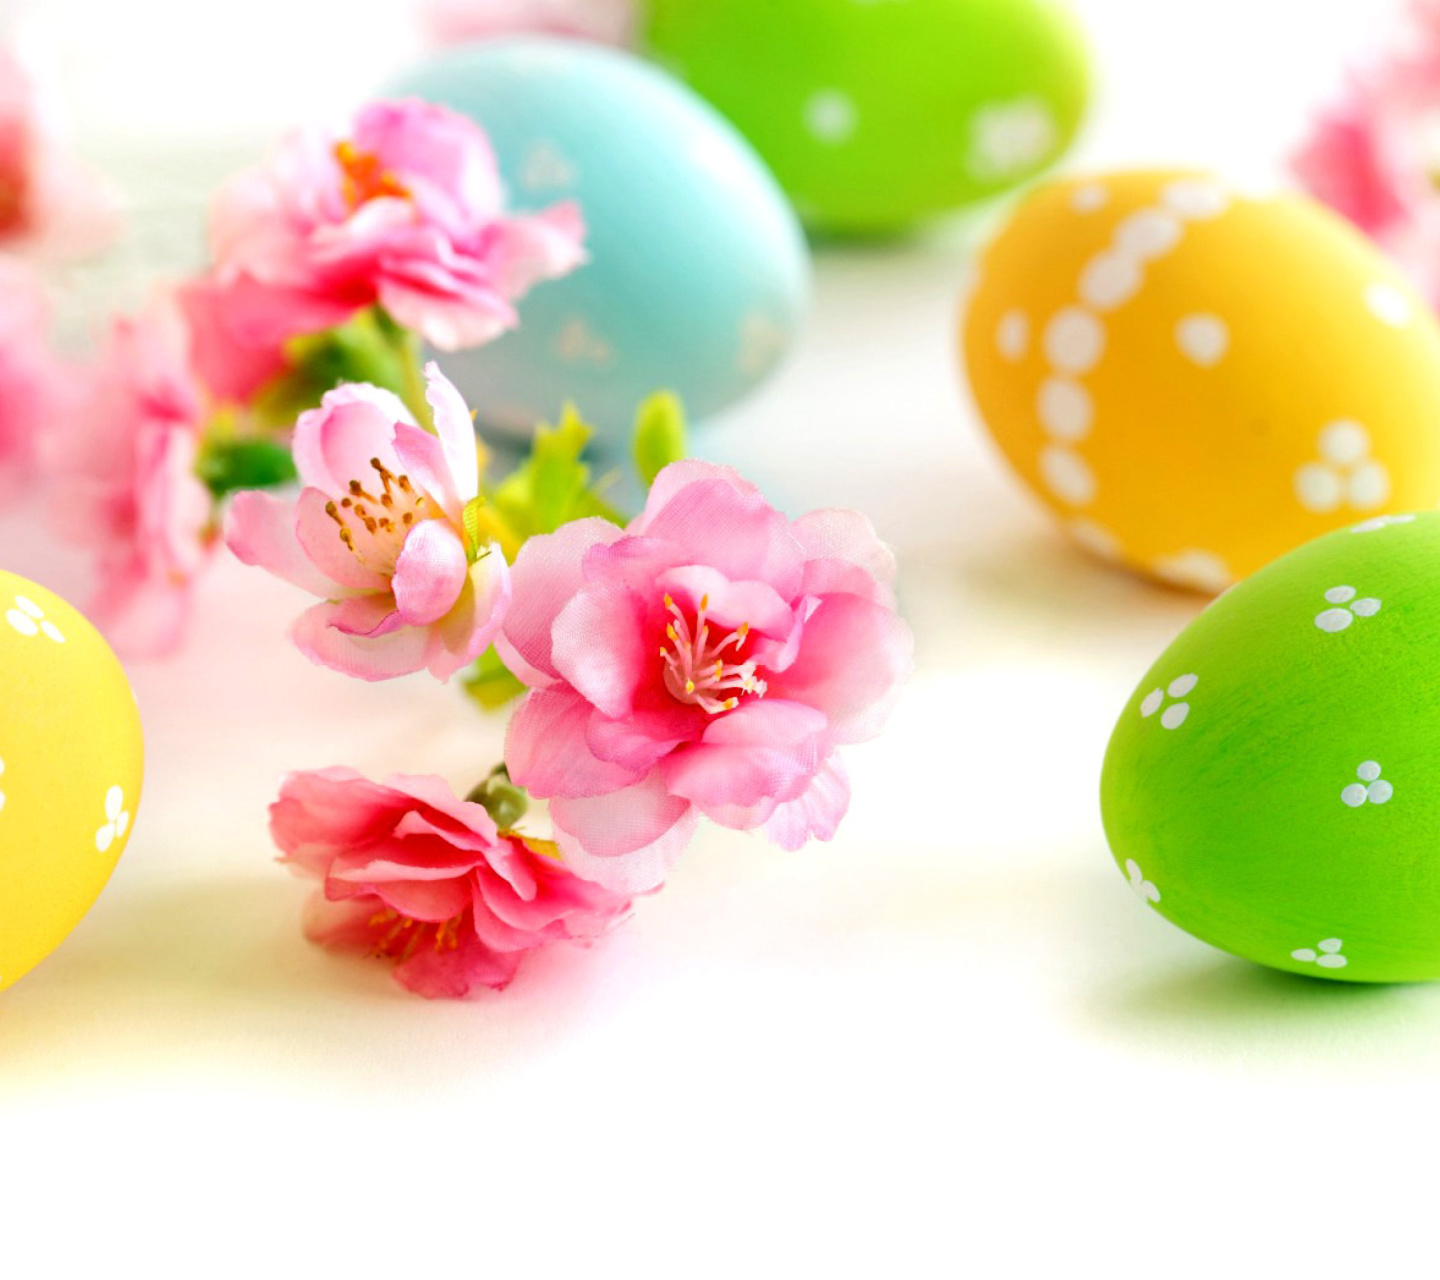 Easter Eggs and Spring Flowers screenshot #1 1440x1280